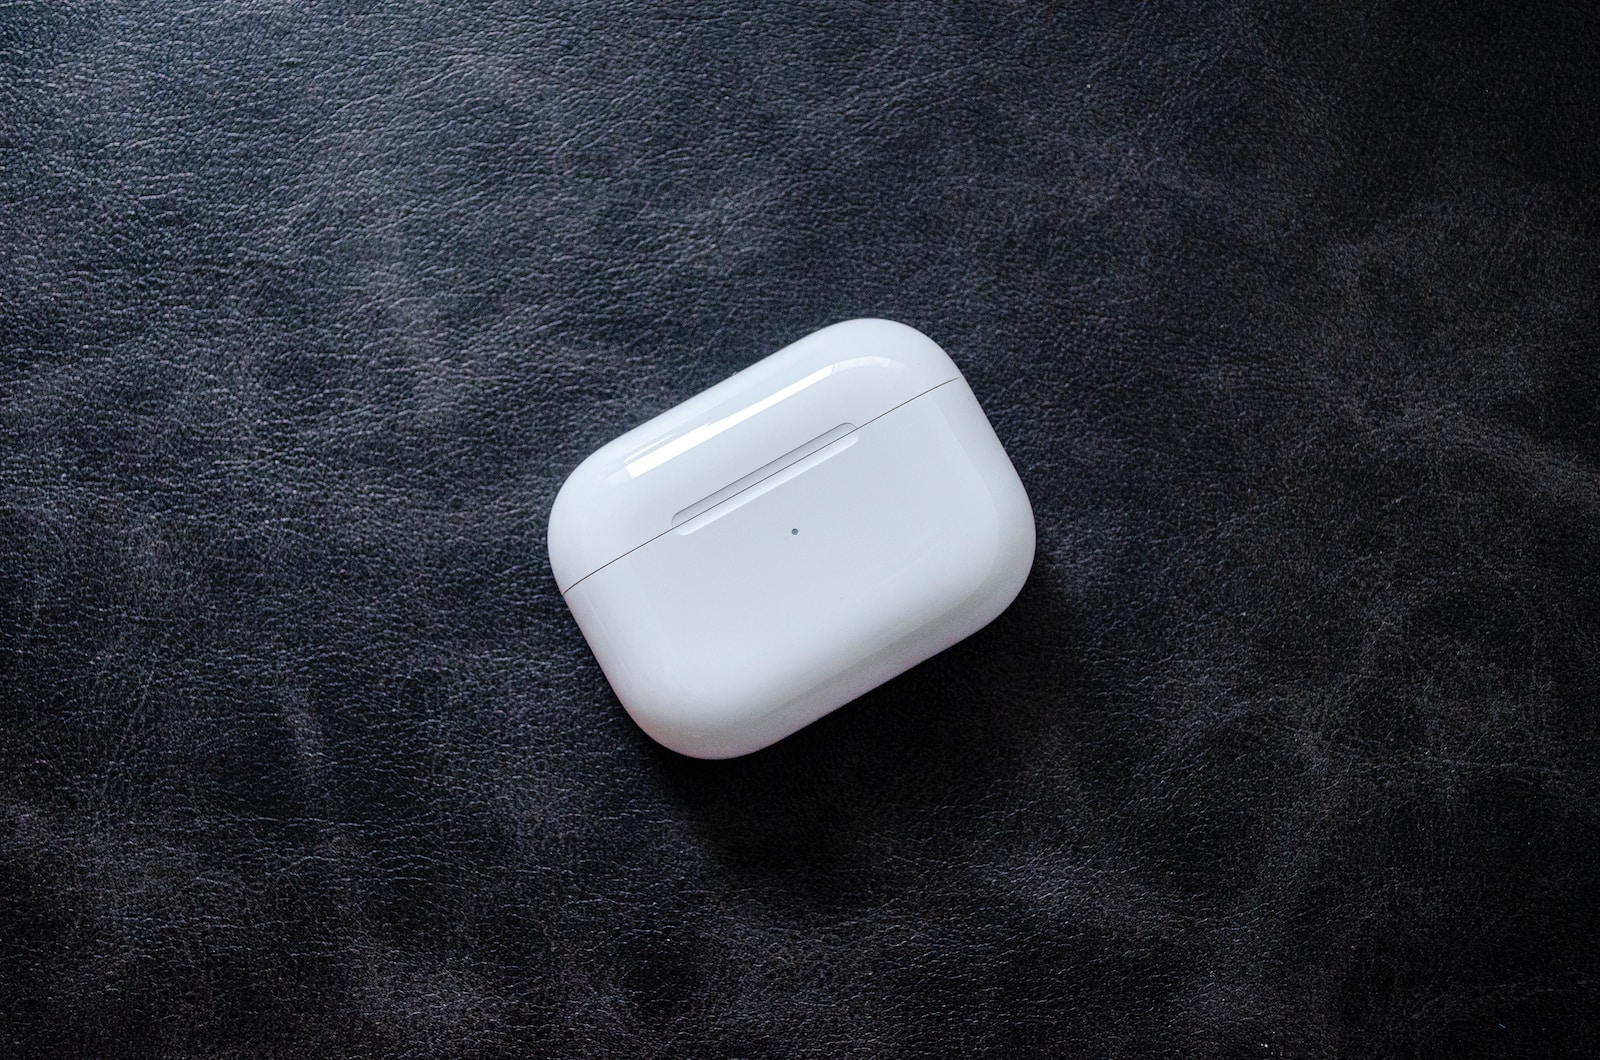 Can You Connect AirPods With One Missing?